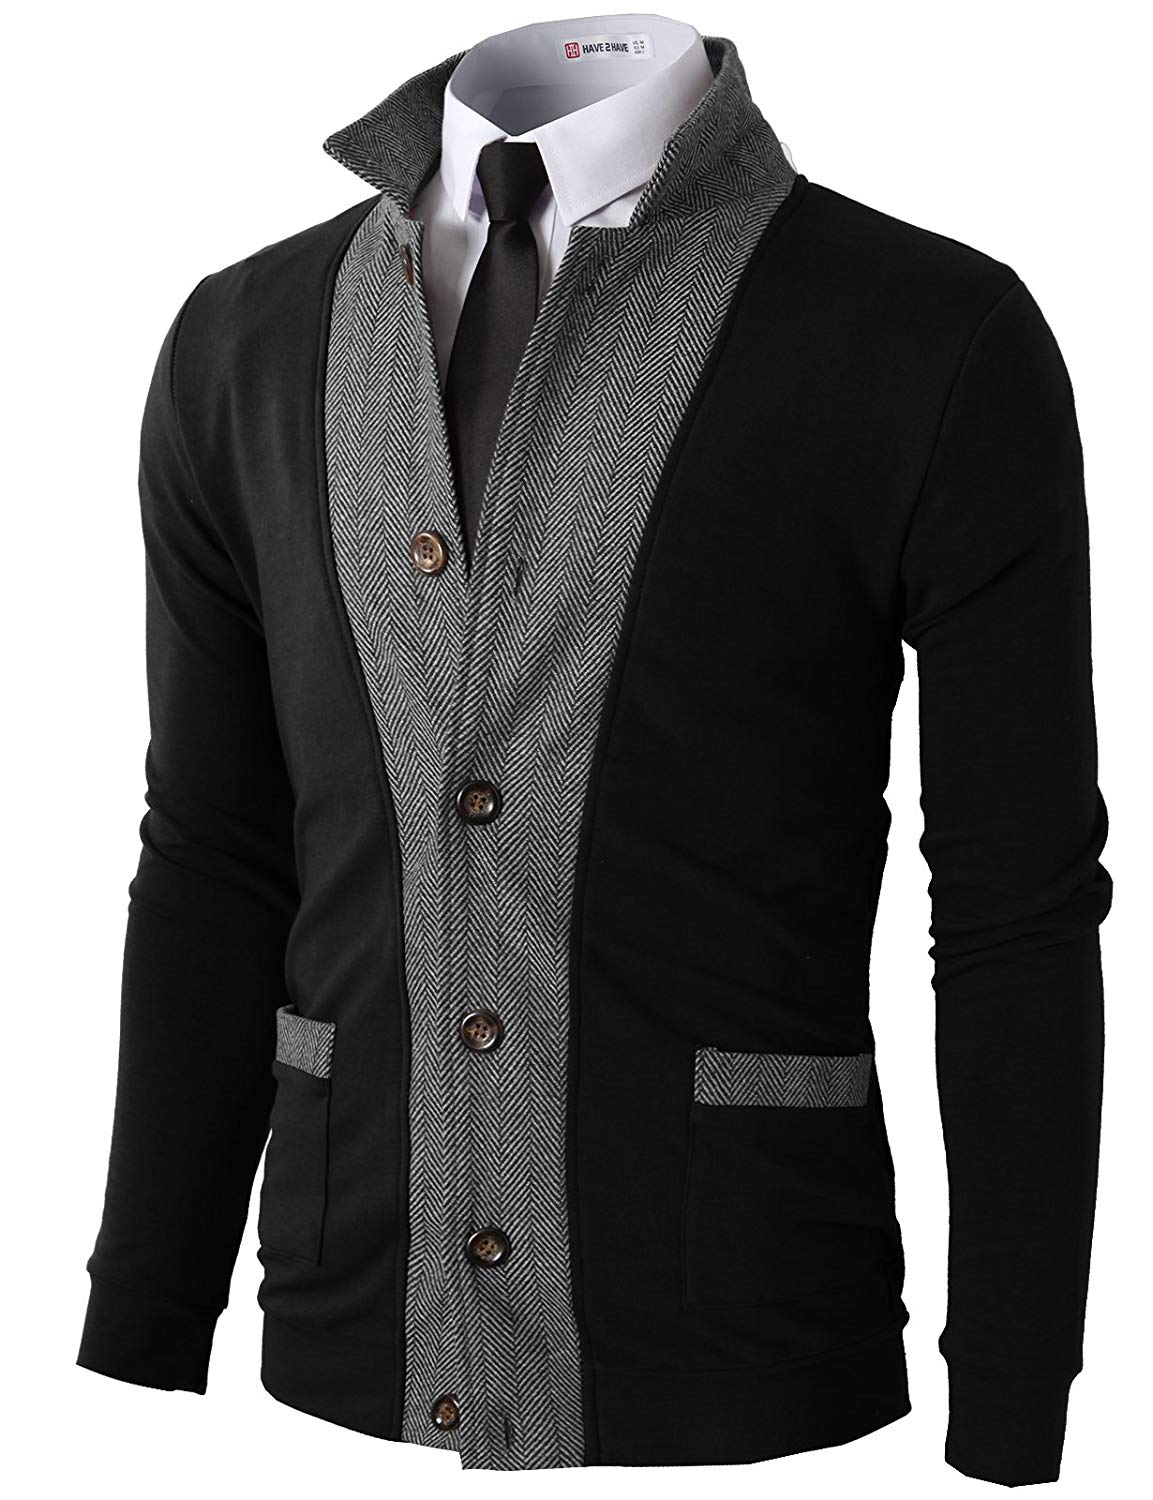 H2H Mens Casual Slim Fit Jacket Cardigans Long Sleeve Button-Down Two-tone Herringbone